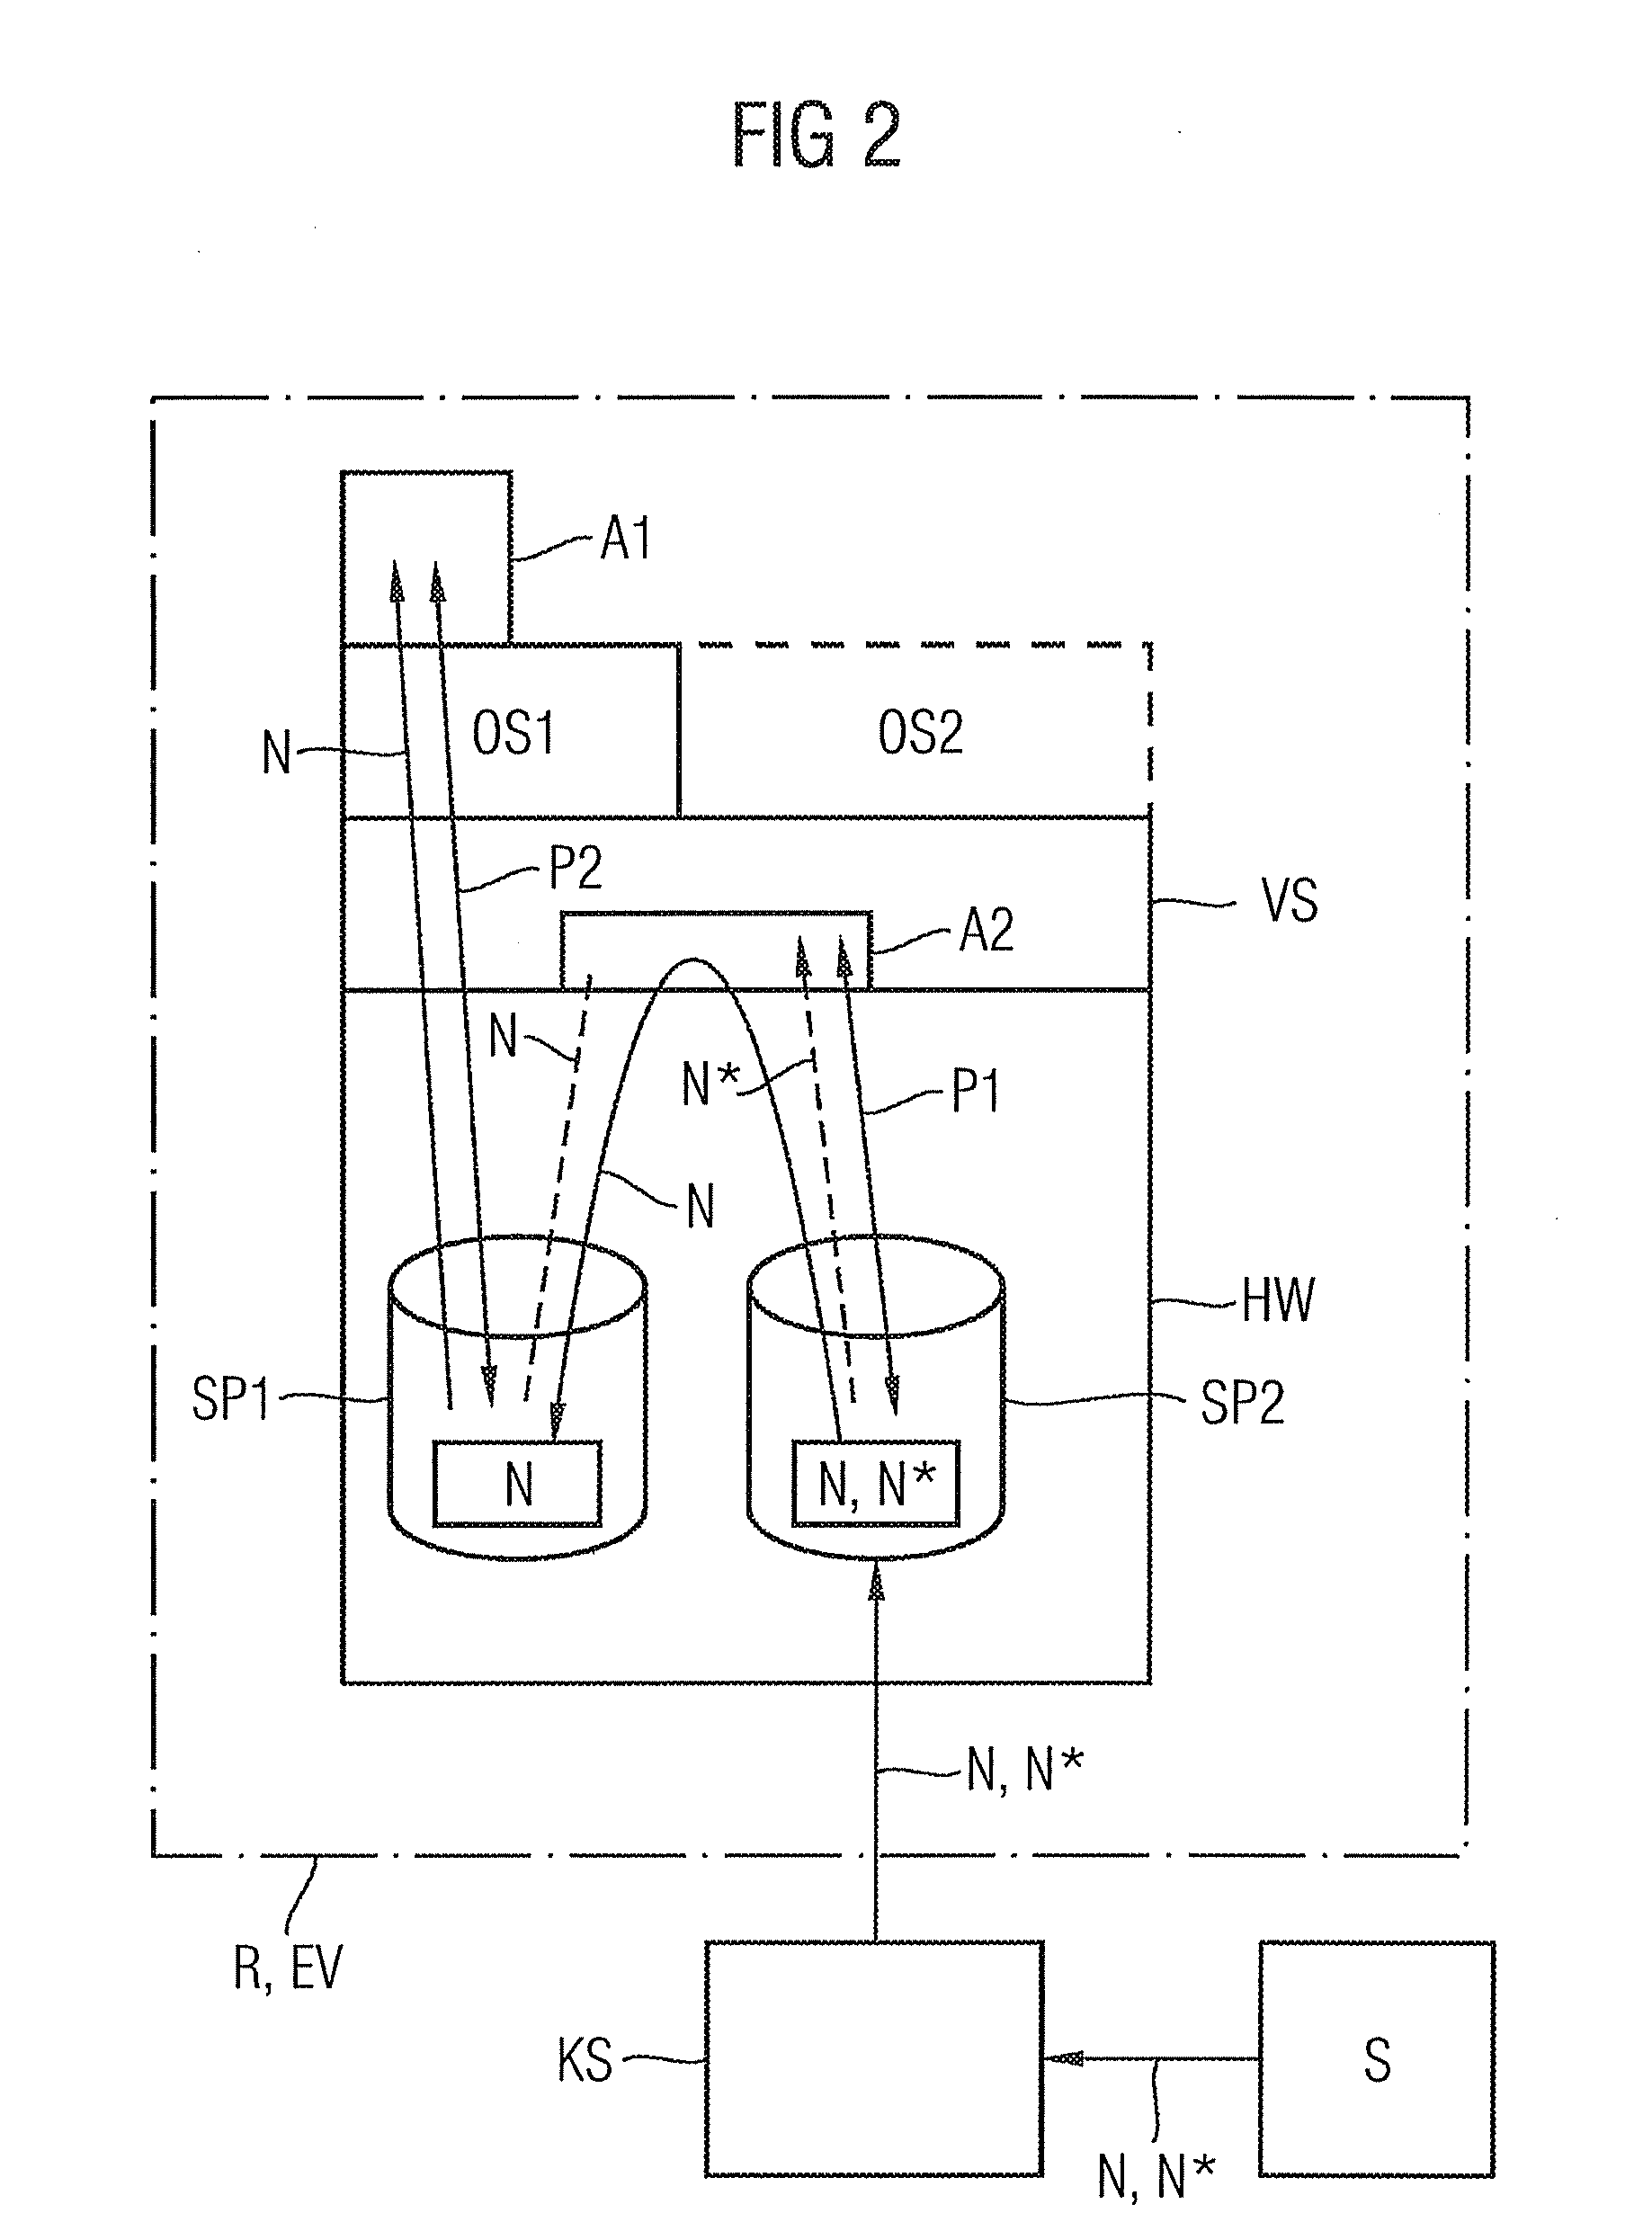 Method and transmitting device for securely creating and sending an electronic message and method and receiving device for securely receiving and processing an electronic message